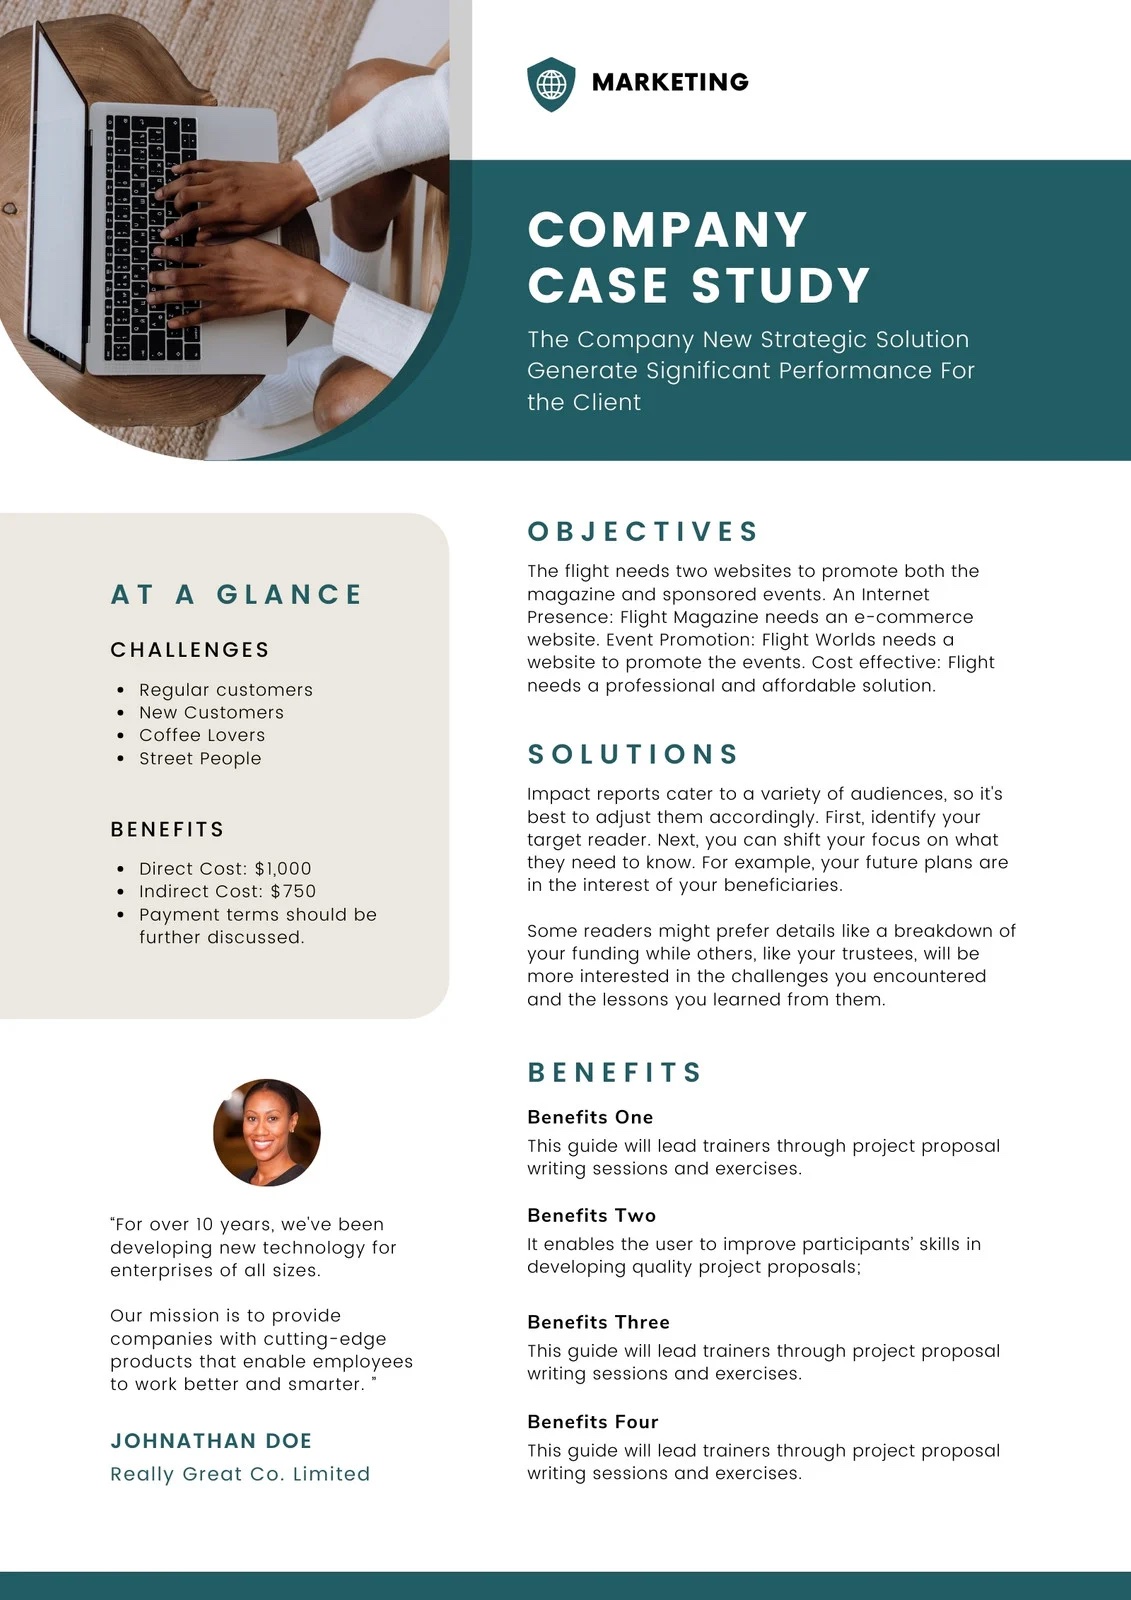 A screenshot of a case study template from Canva